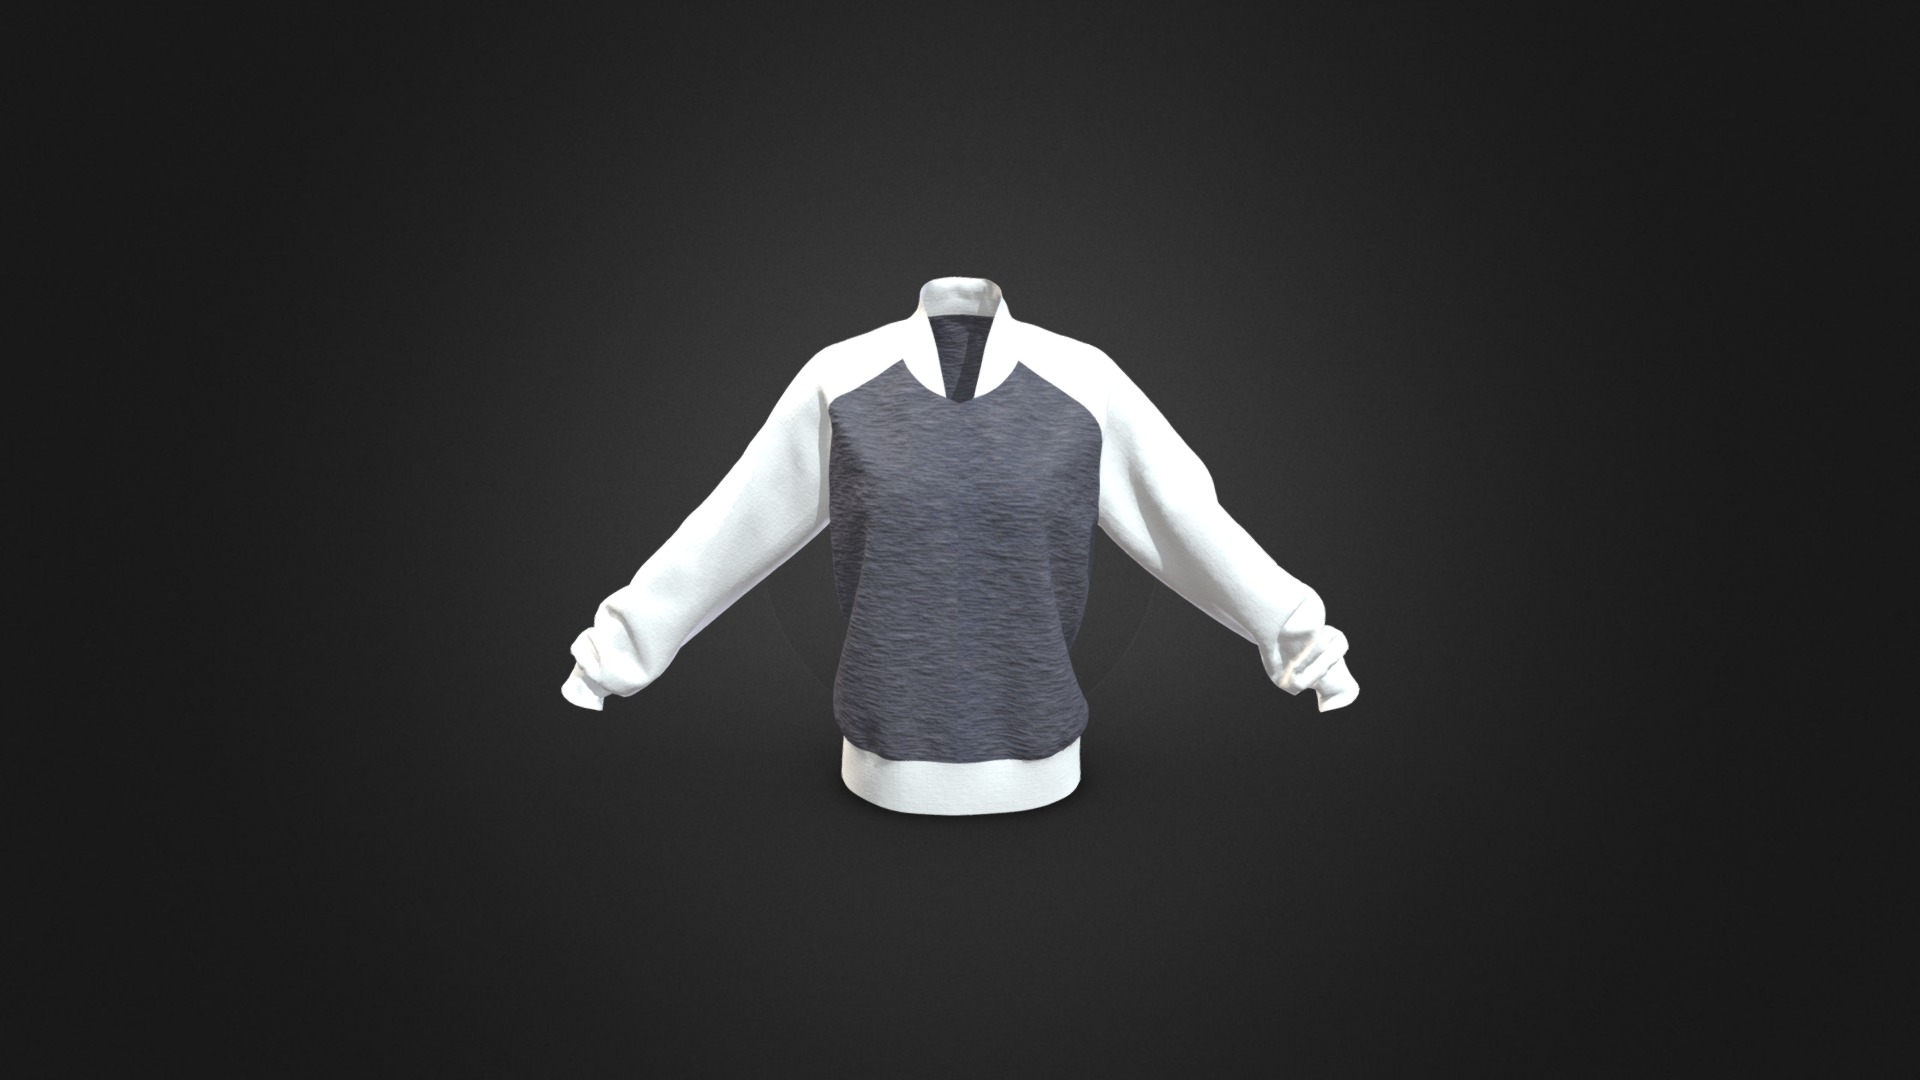 3D model Baseball Jacket - This is a 3D model of the Baseball Jacket. The 3D model is about a white shirt with a black background.